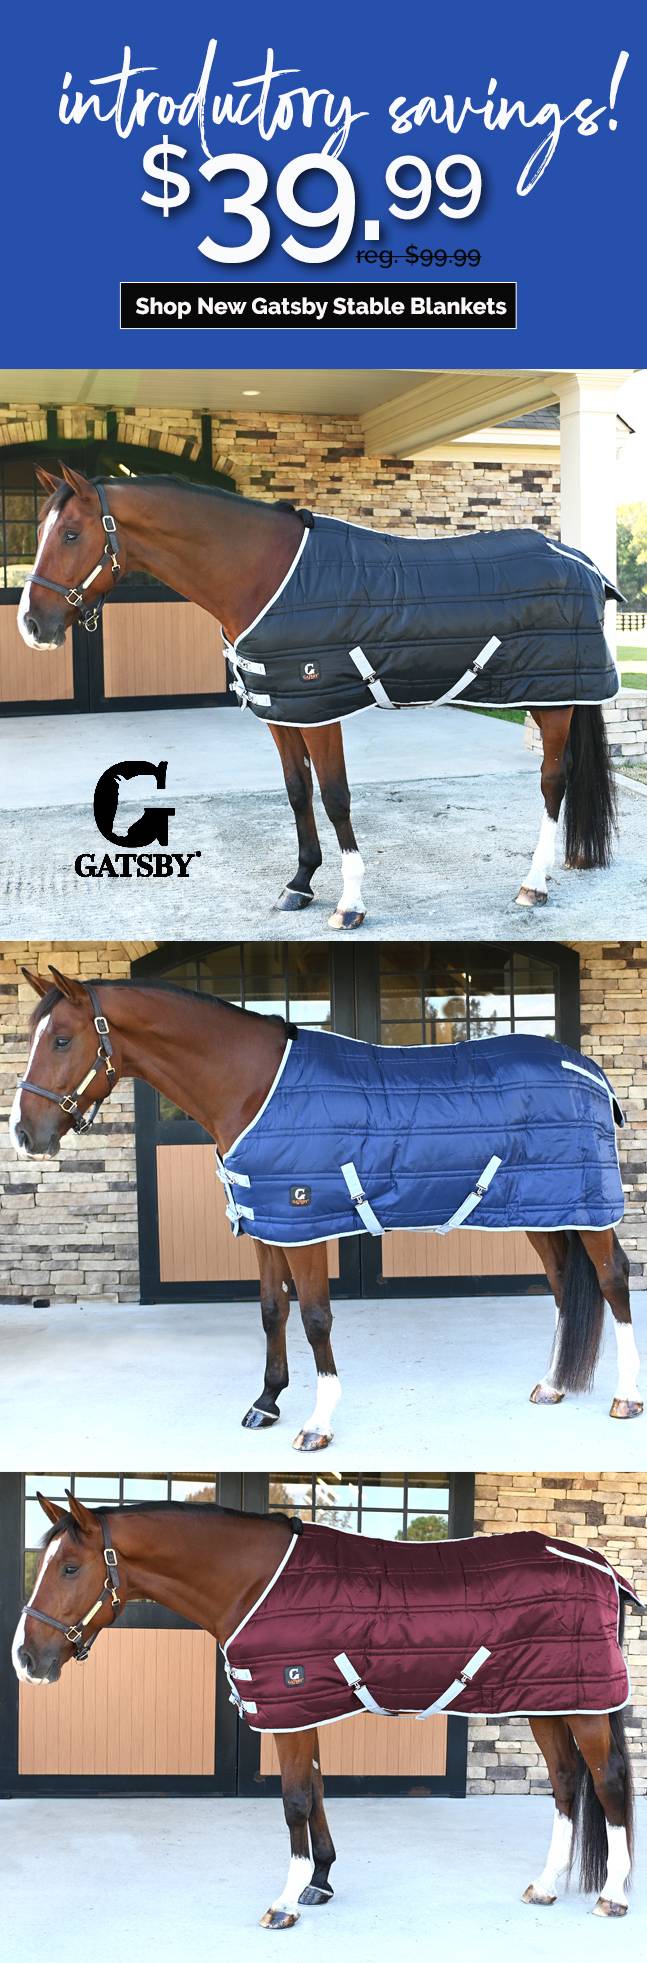 Gatsby Stable Blanket